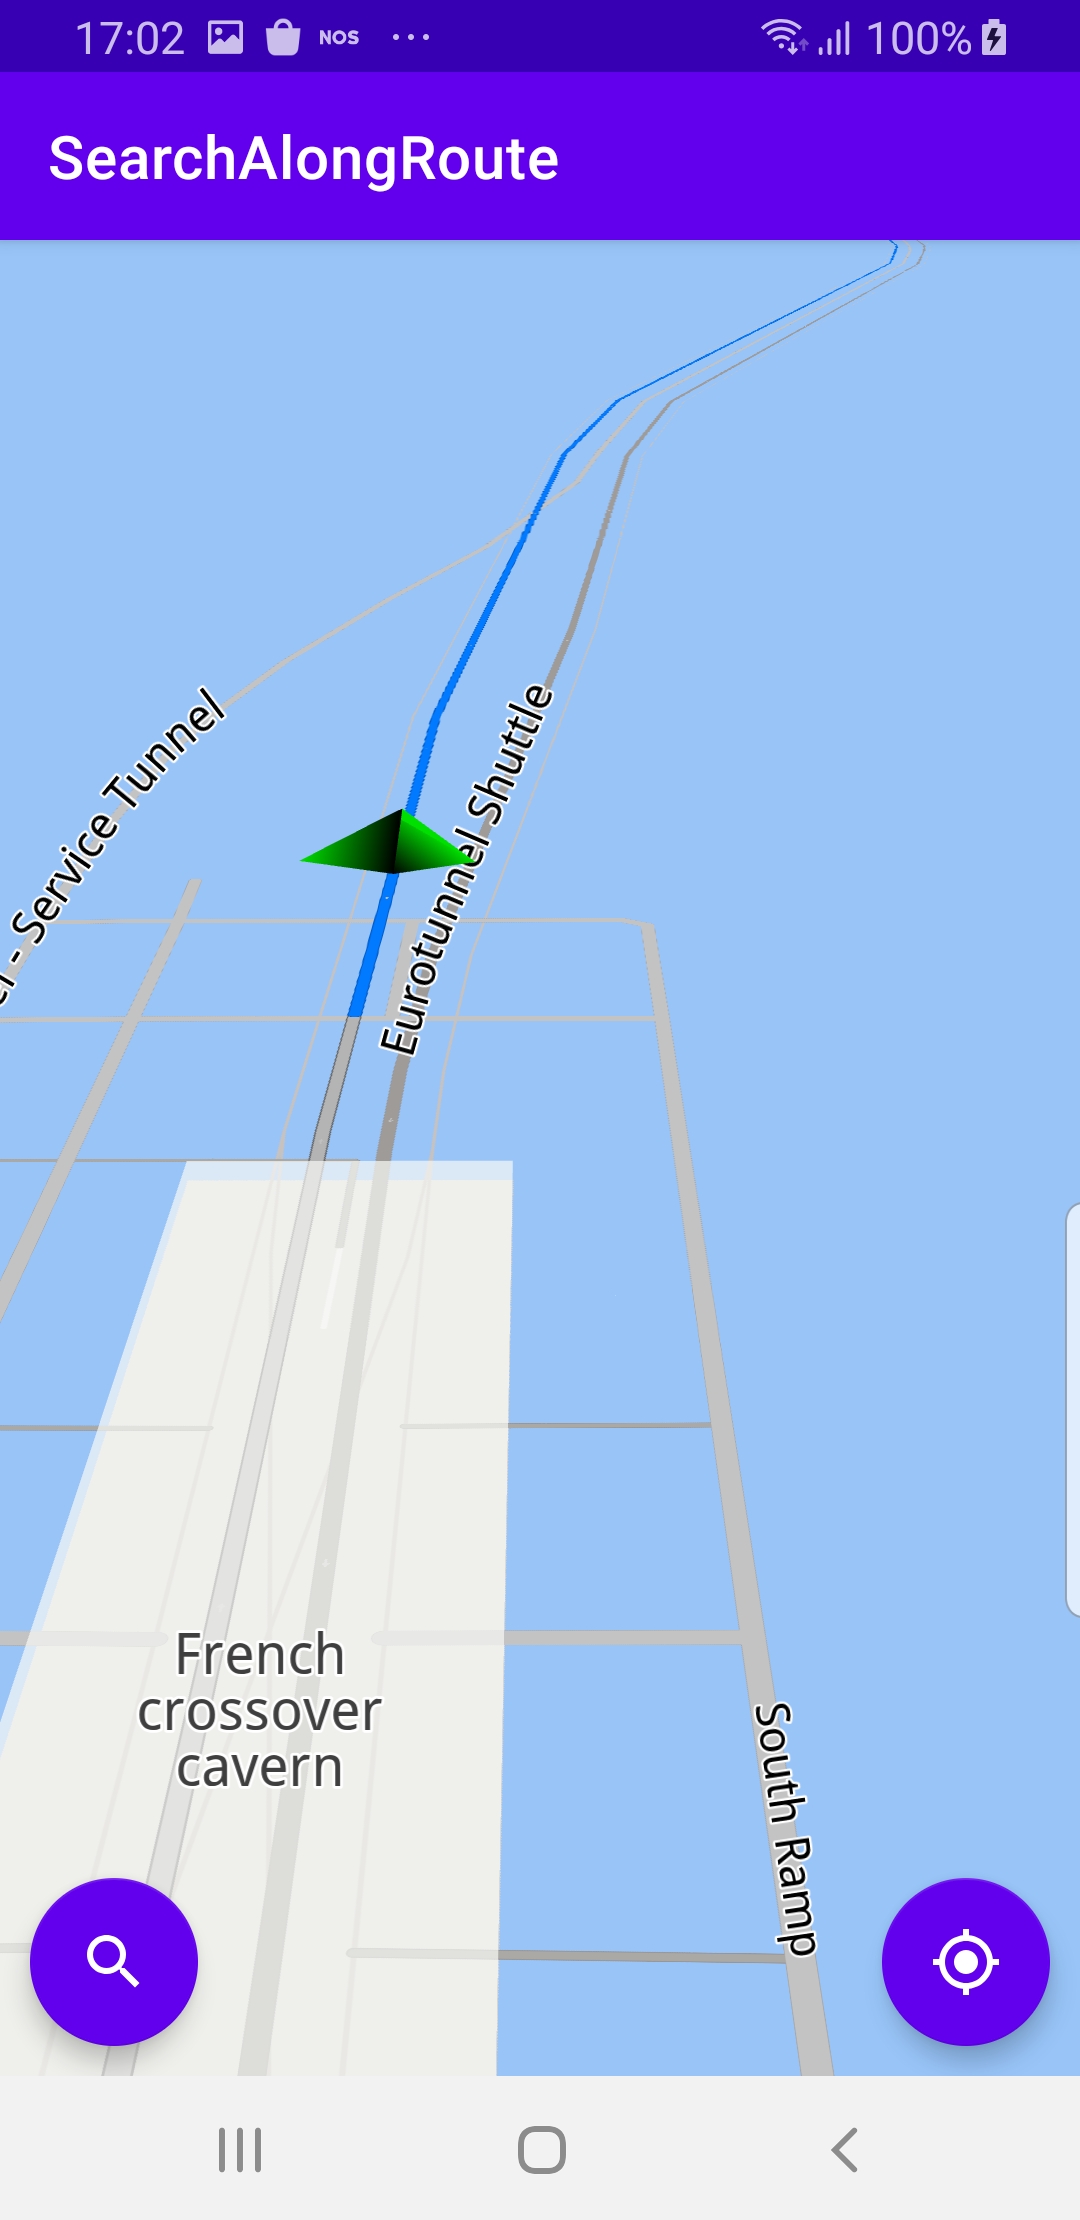 Search along route simulation example Android screenshot